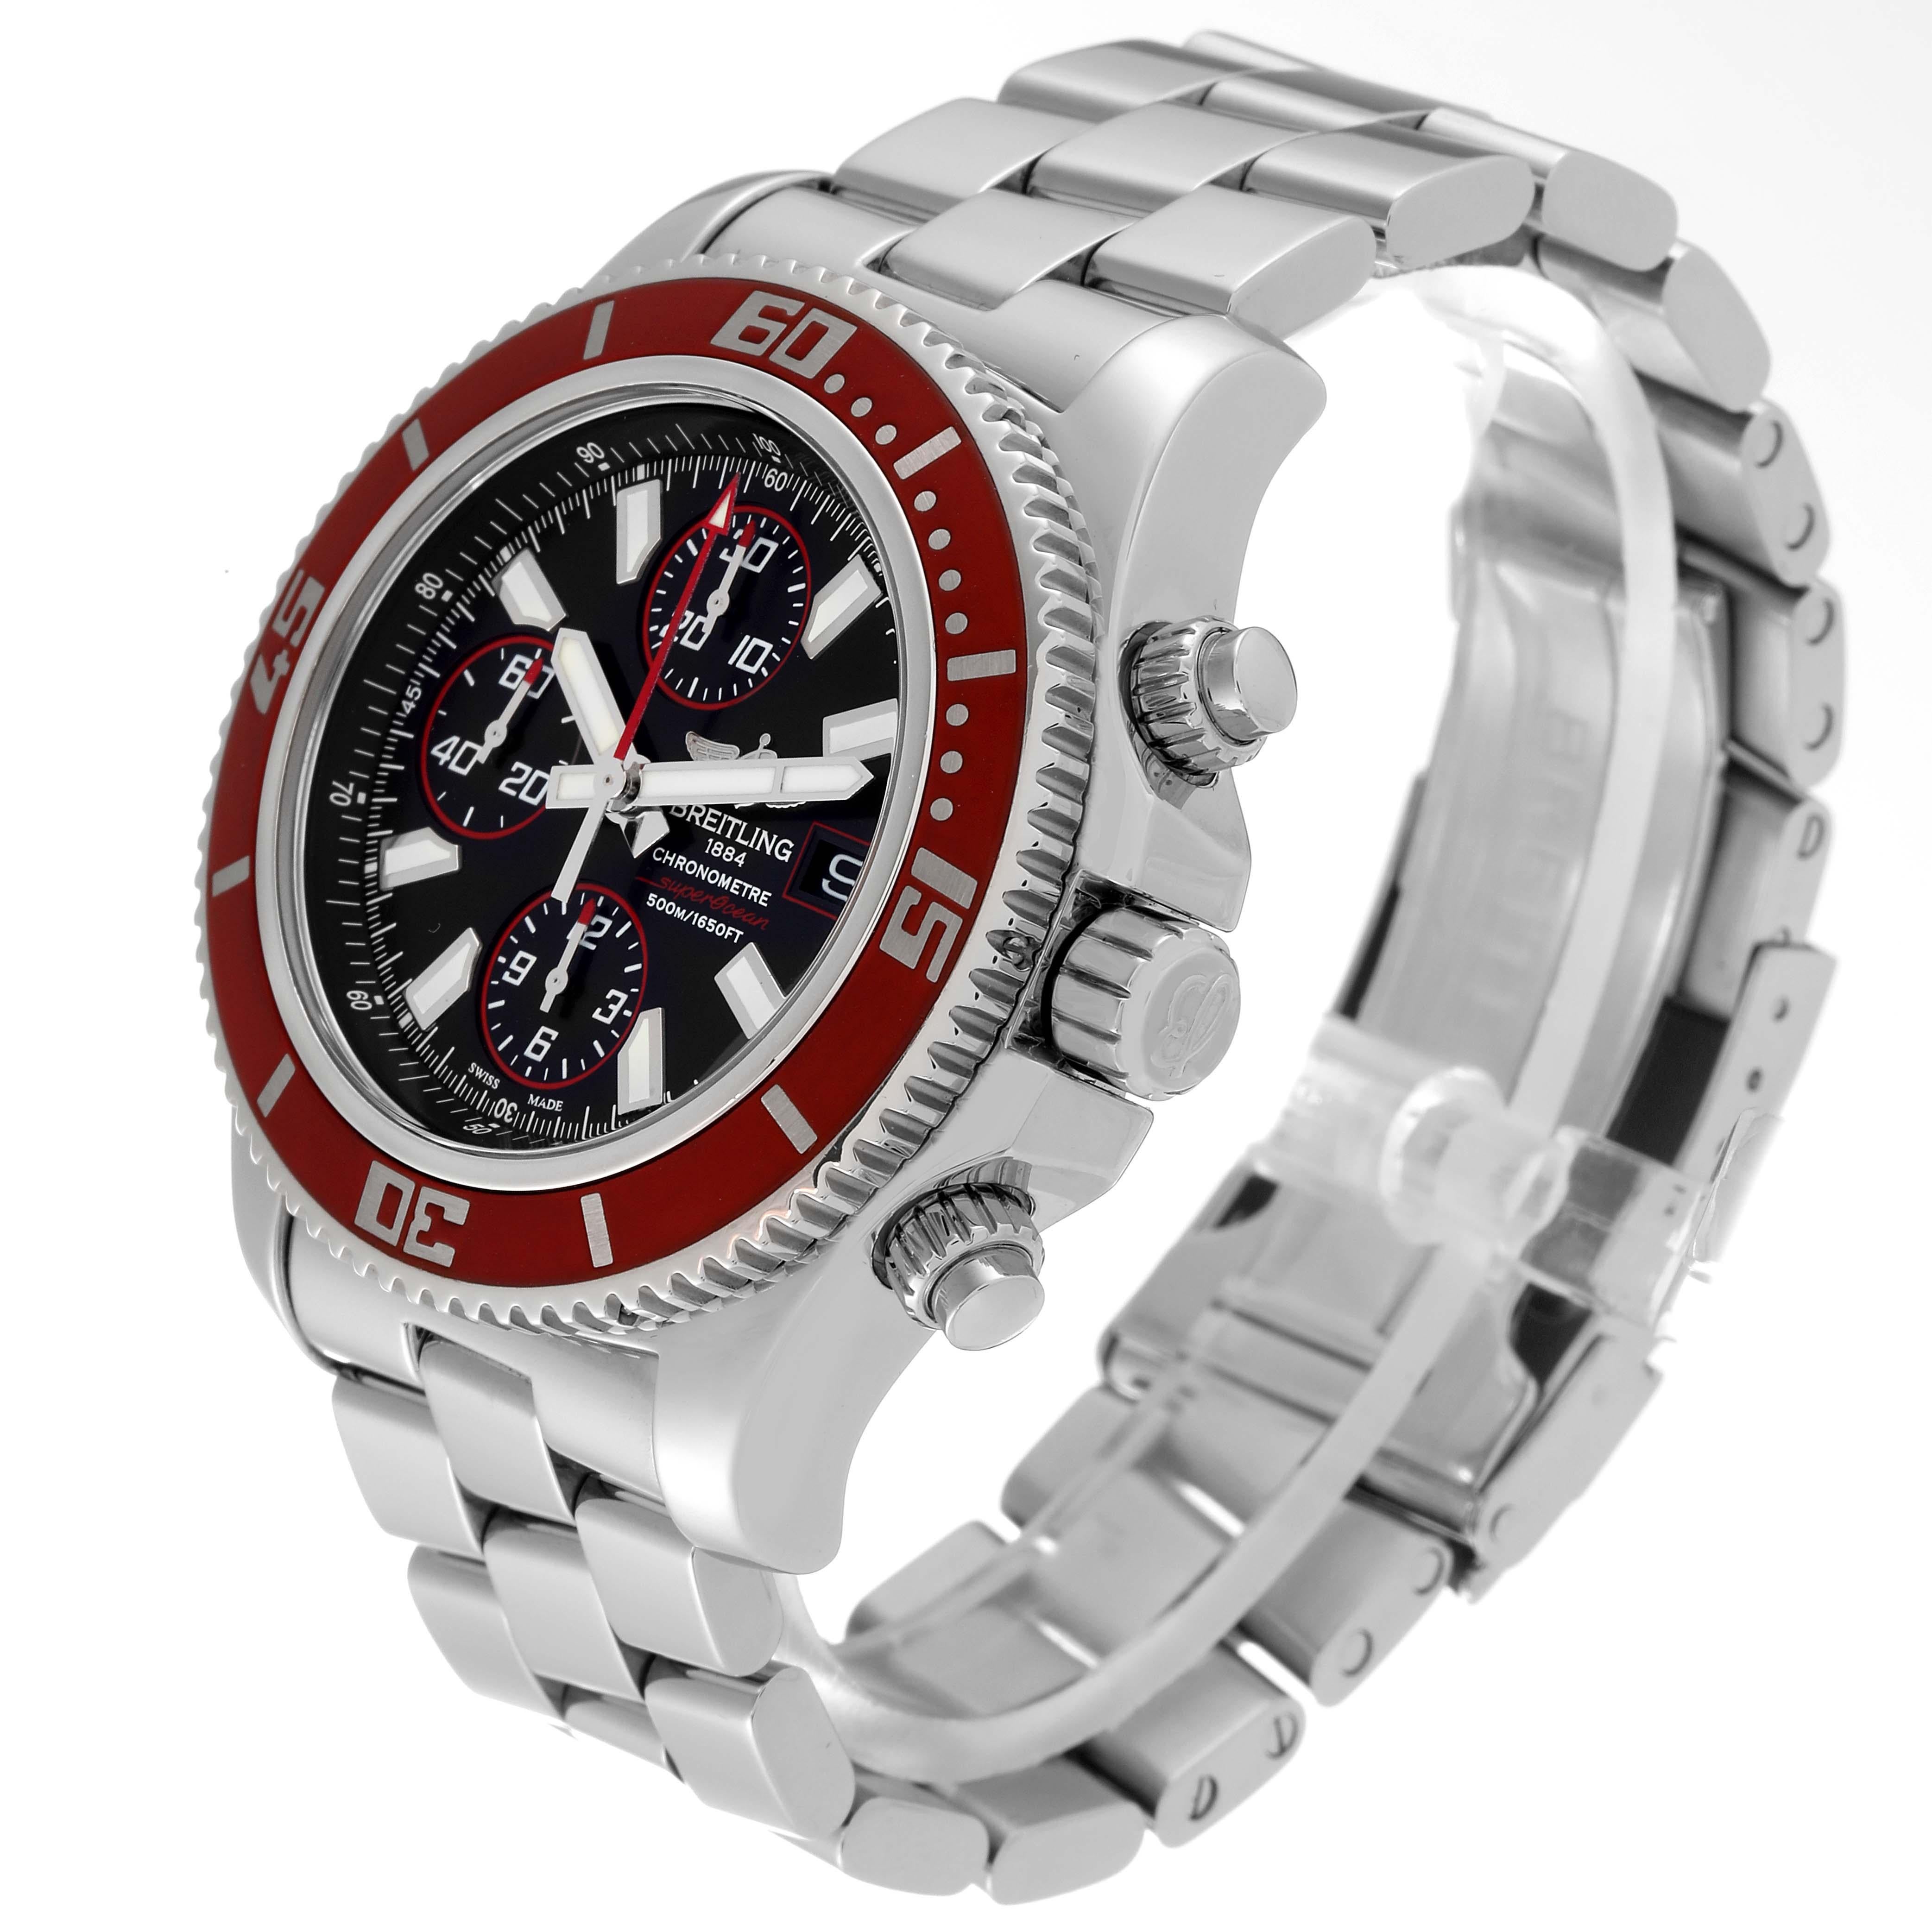 Breitling Aeromarine SuperOcean II Red Bezel Limited Edition Mens Watch A13341 For Sale 5